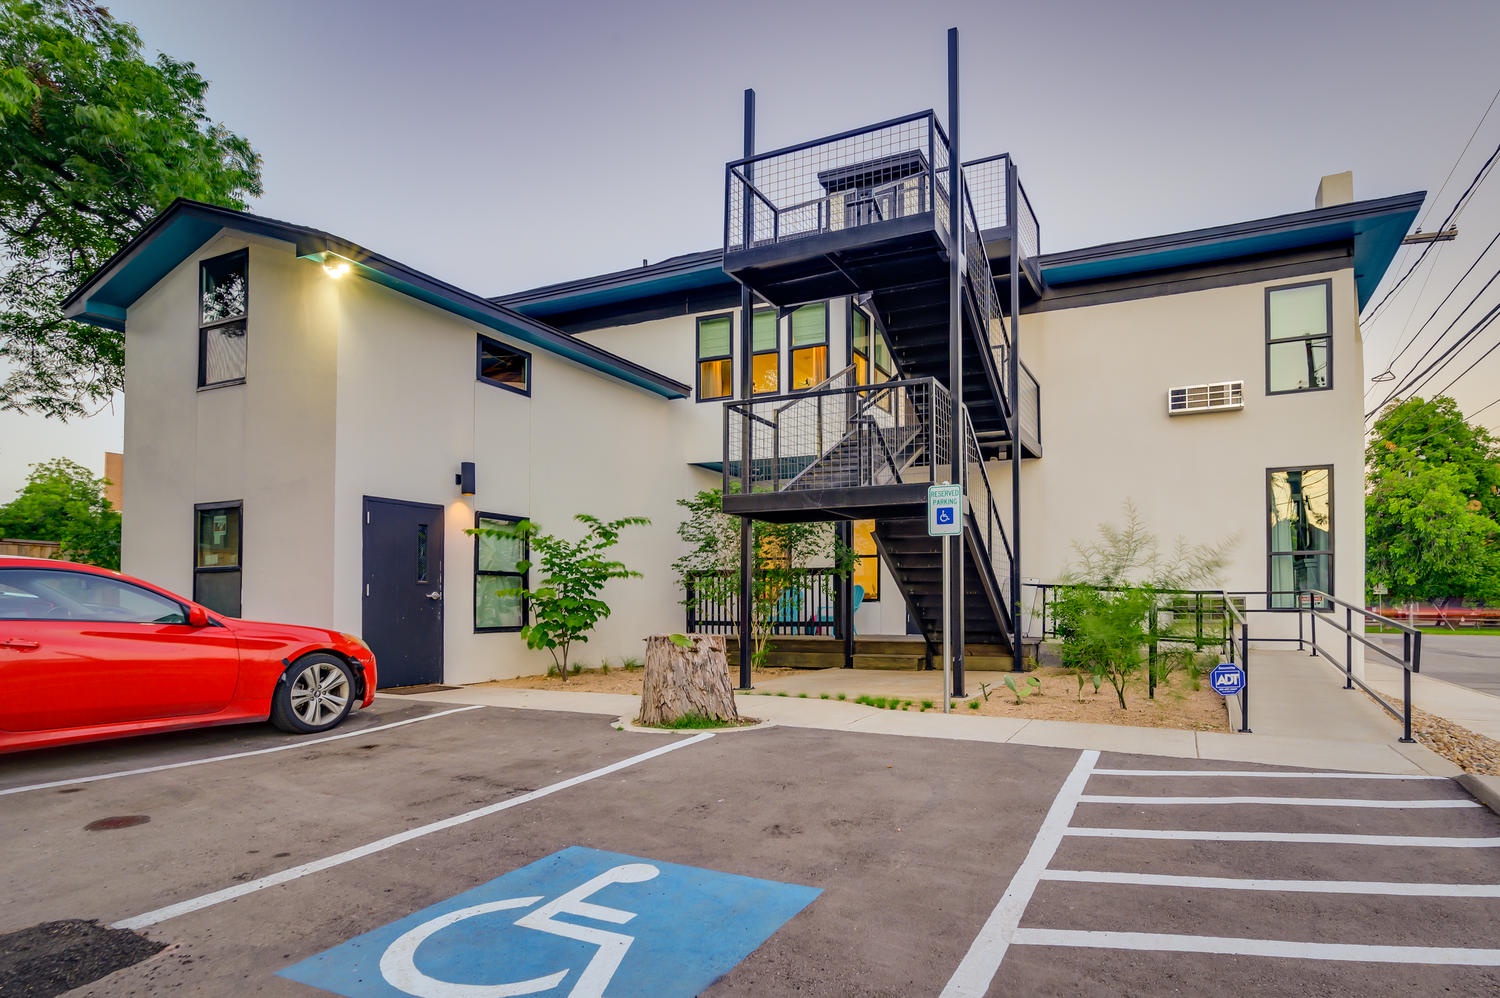 This exceptional B&B offers 6 shared/unassigned spots in the Parking Lot behind the building, including 1 accessible space